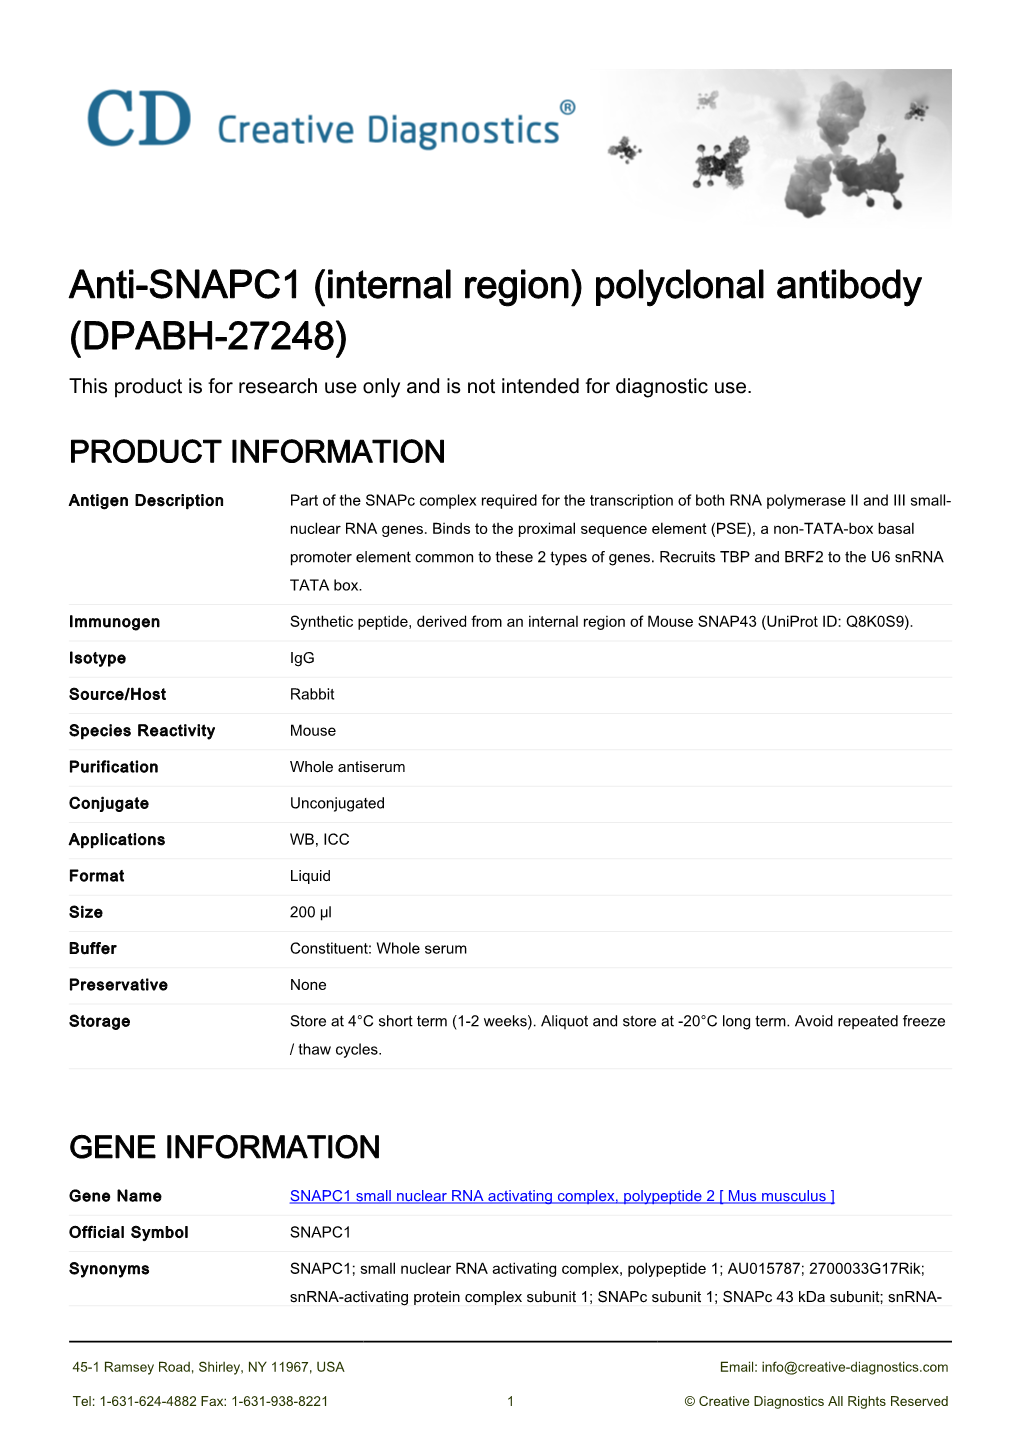 Anti-SNAPC1 (Internal Region) Polyclonal Antibody (DPABH-27248) This Product Is for Research Use Only and Is Not Intended for Diagnostic Use